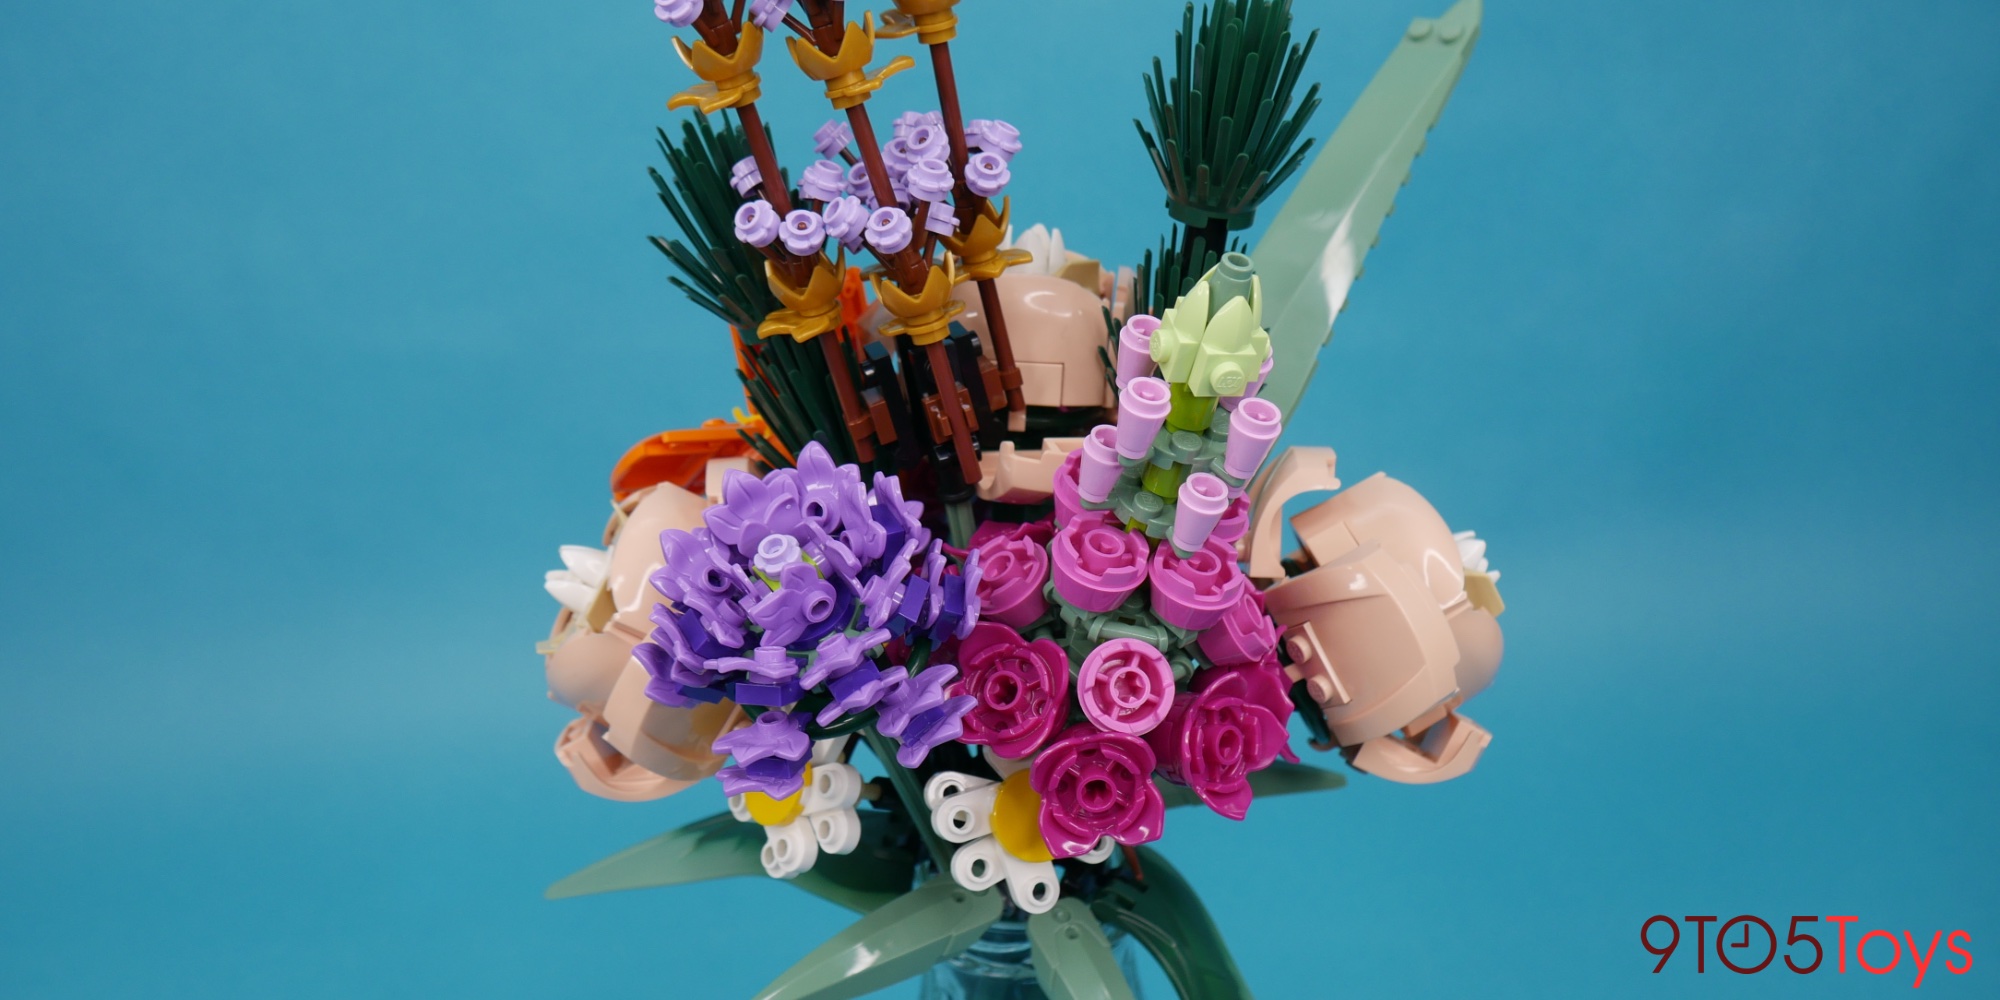 Made a LEGO vase for the Flower Bouquet 💐 : r/lego